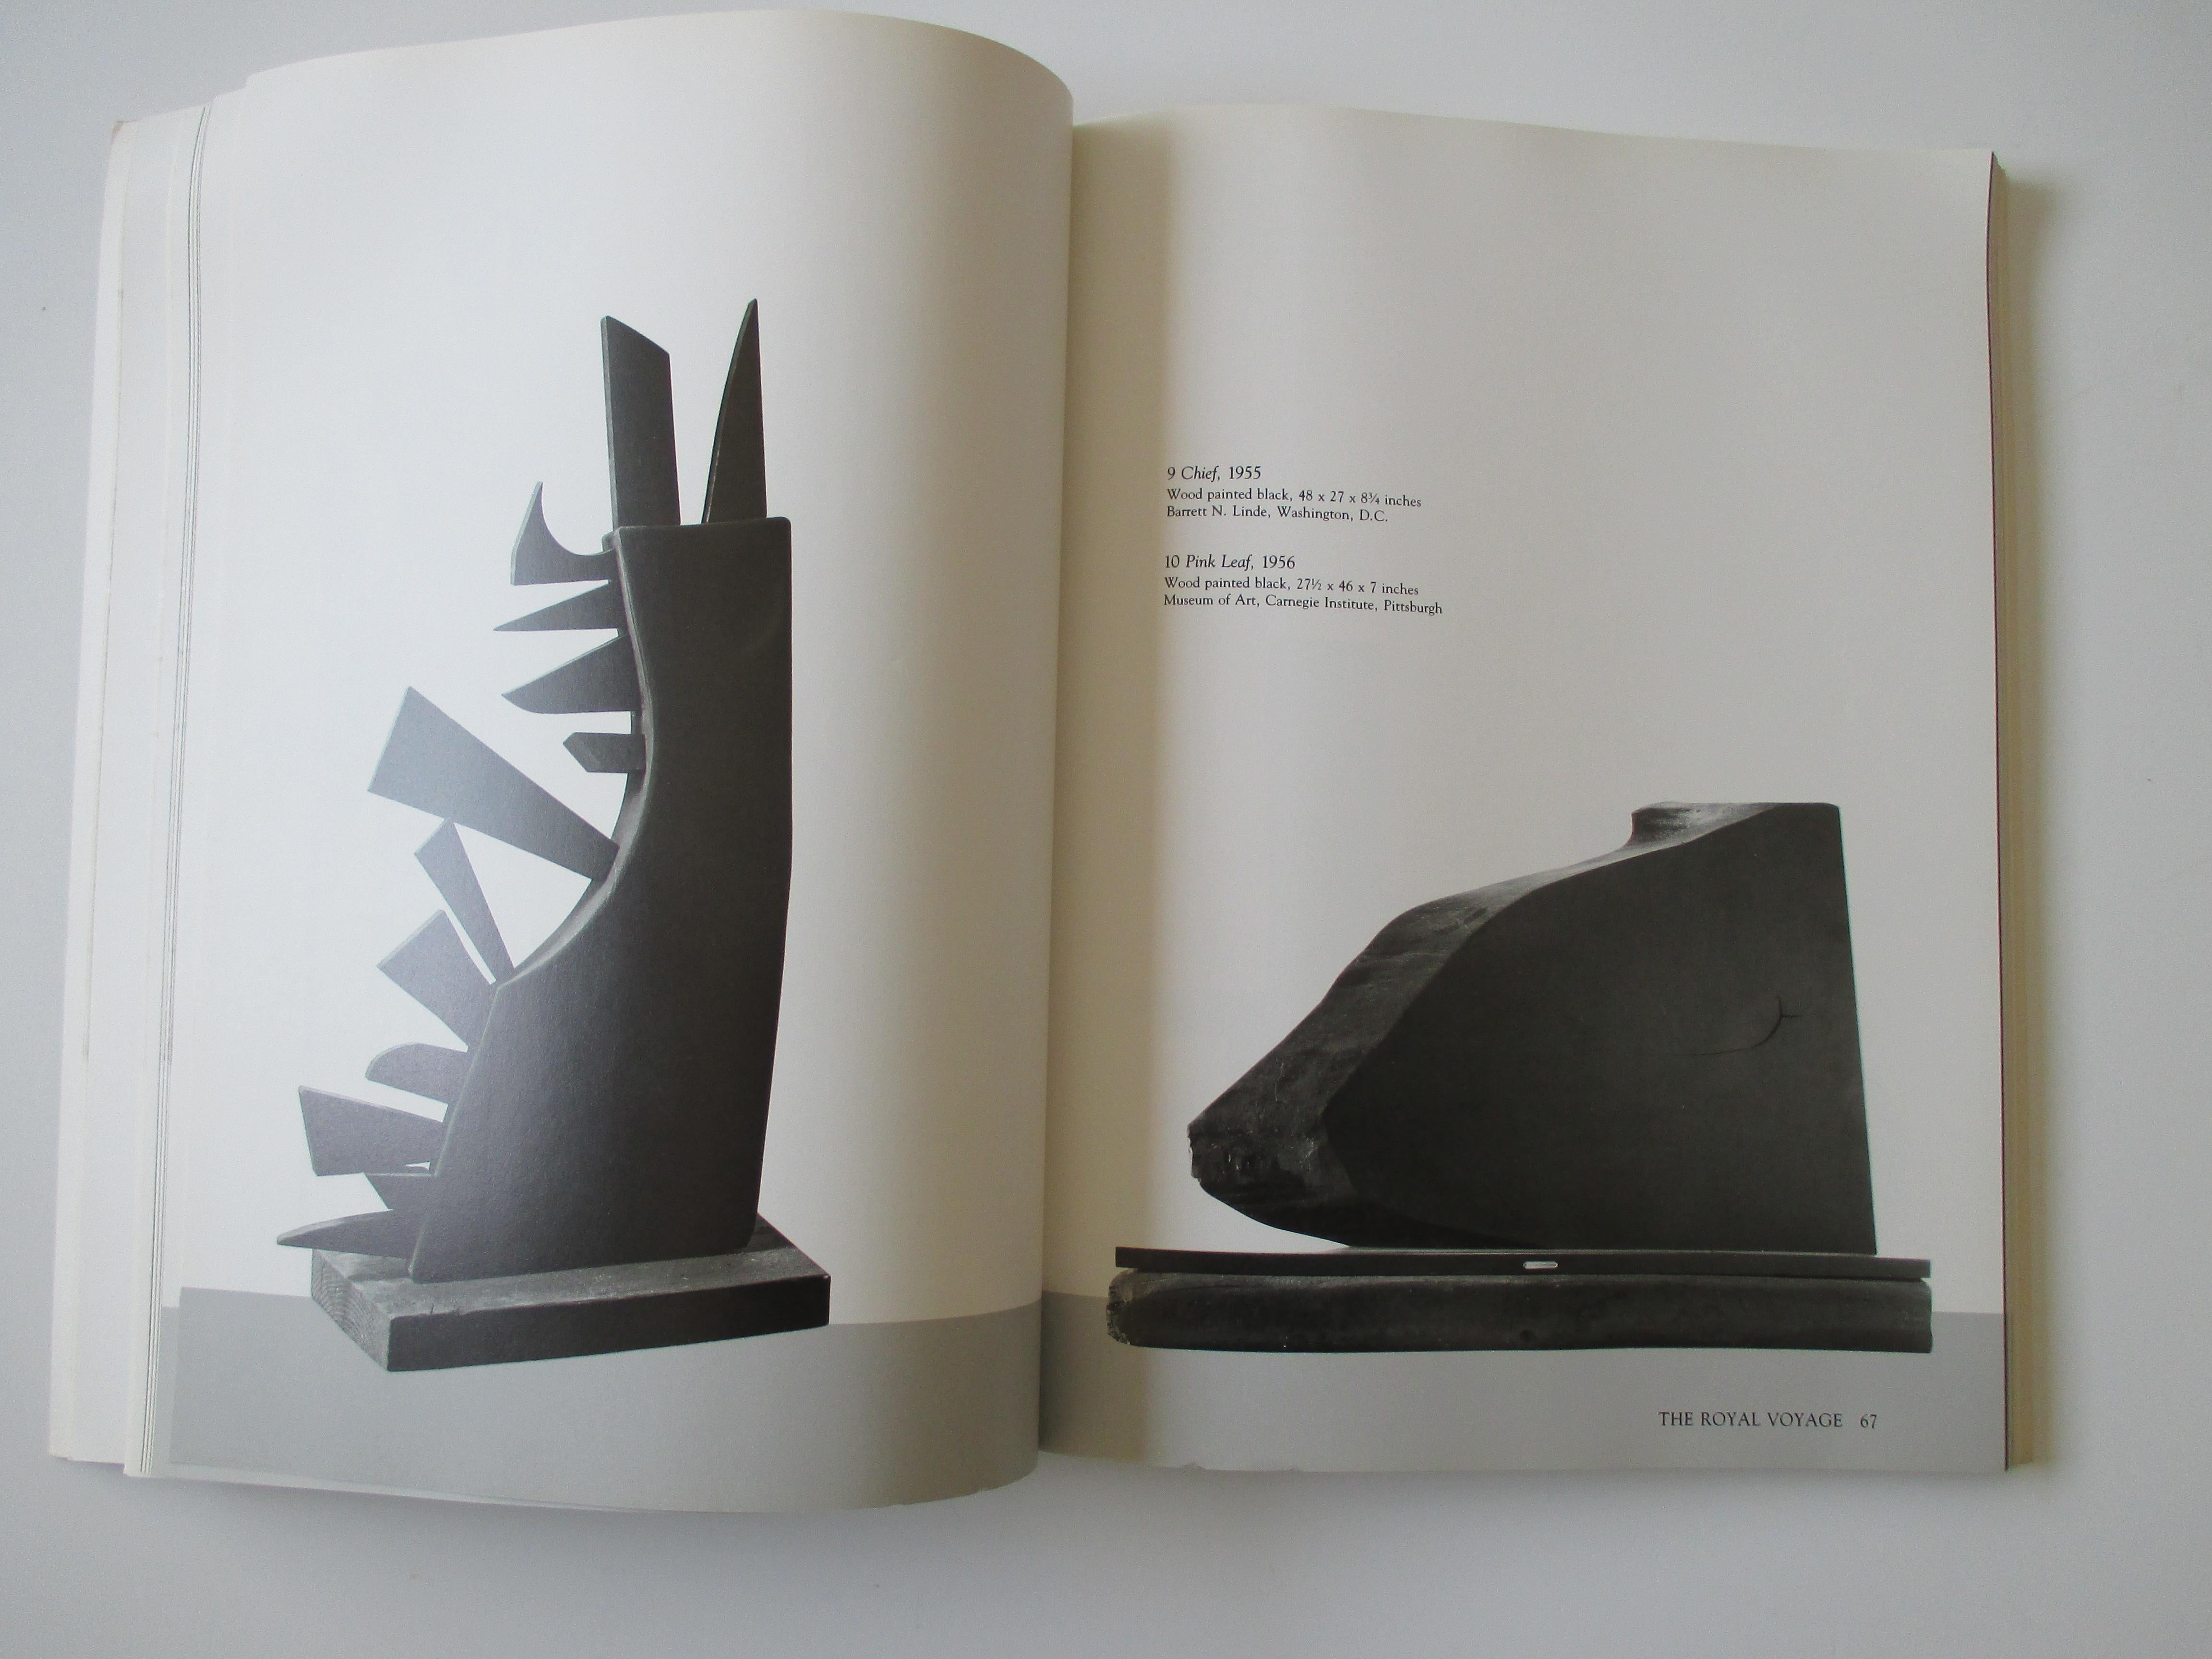 Louise Nevelson Atmospheres and Environments Book
A tribute to the acclaimed American sculptor on her eightieth birthday presents the five major 